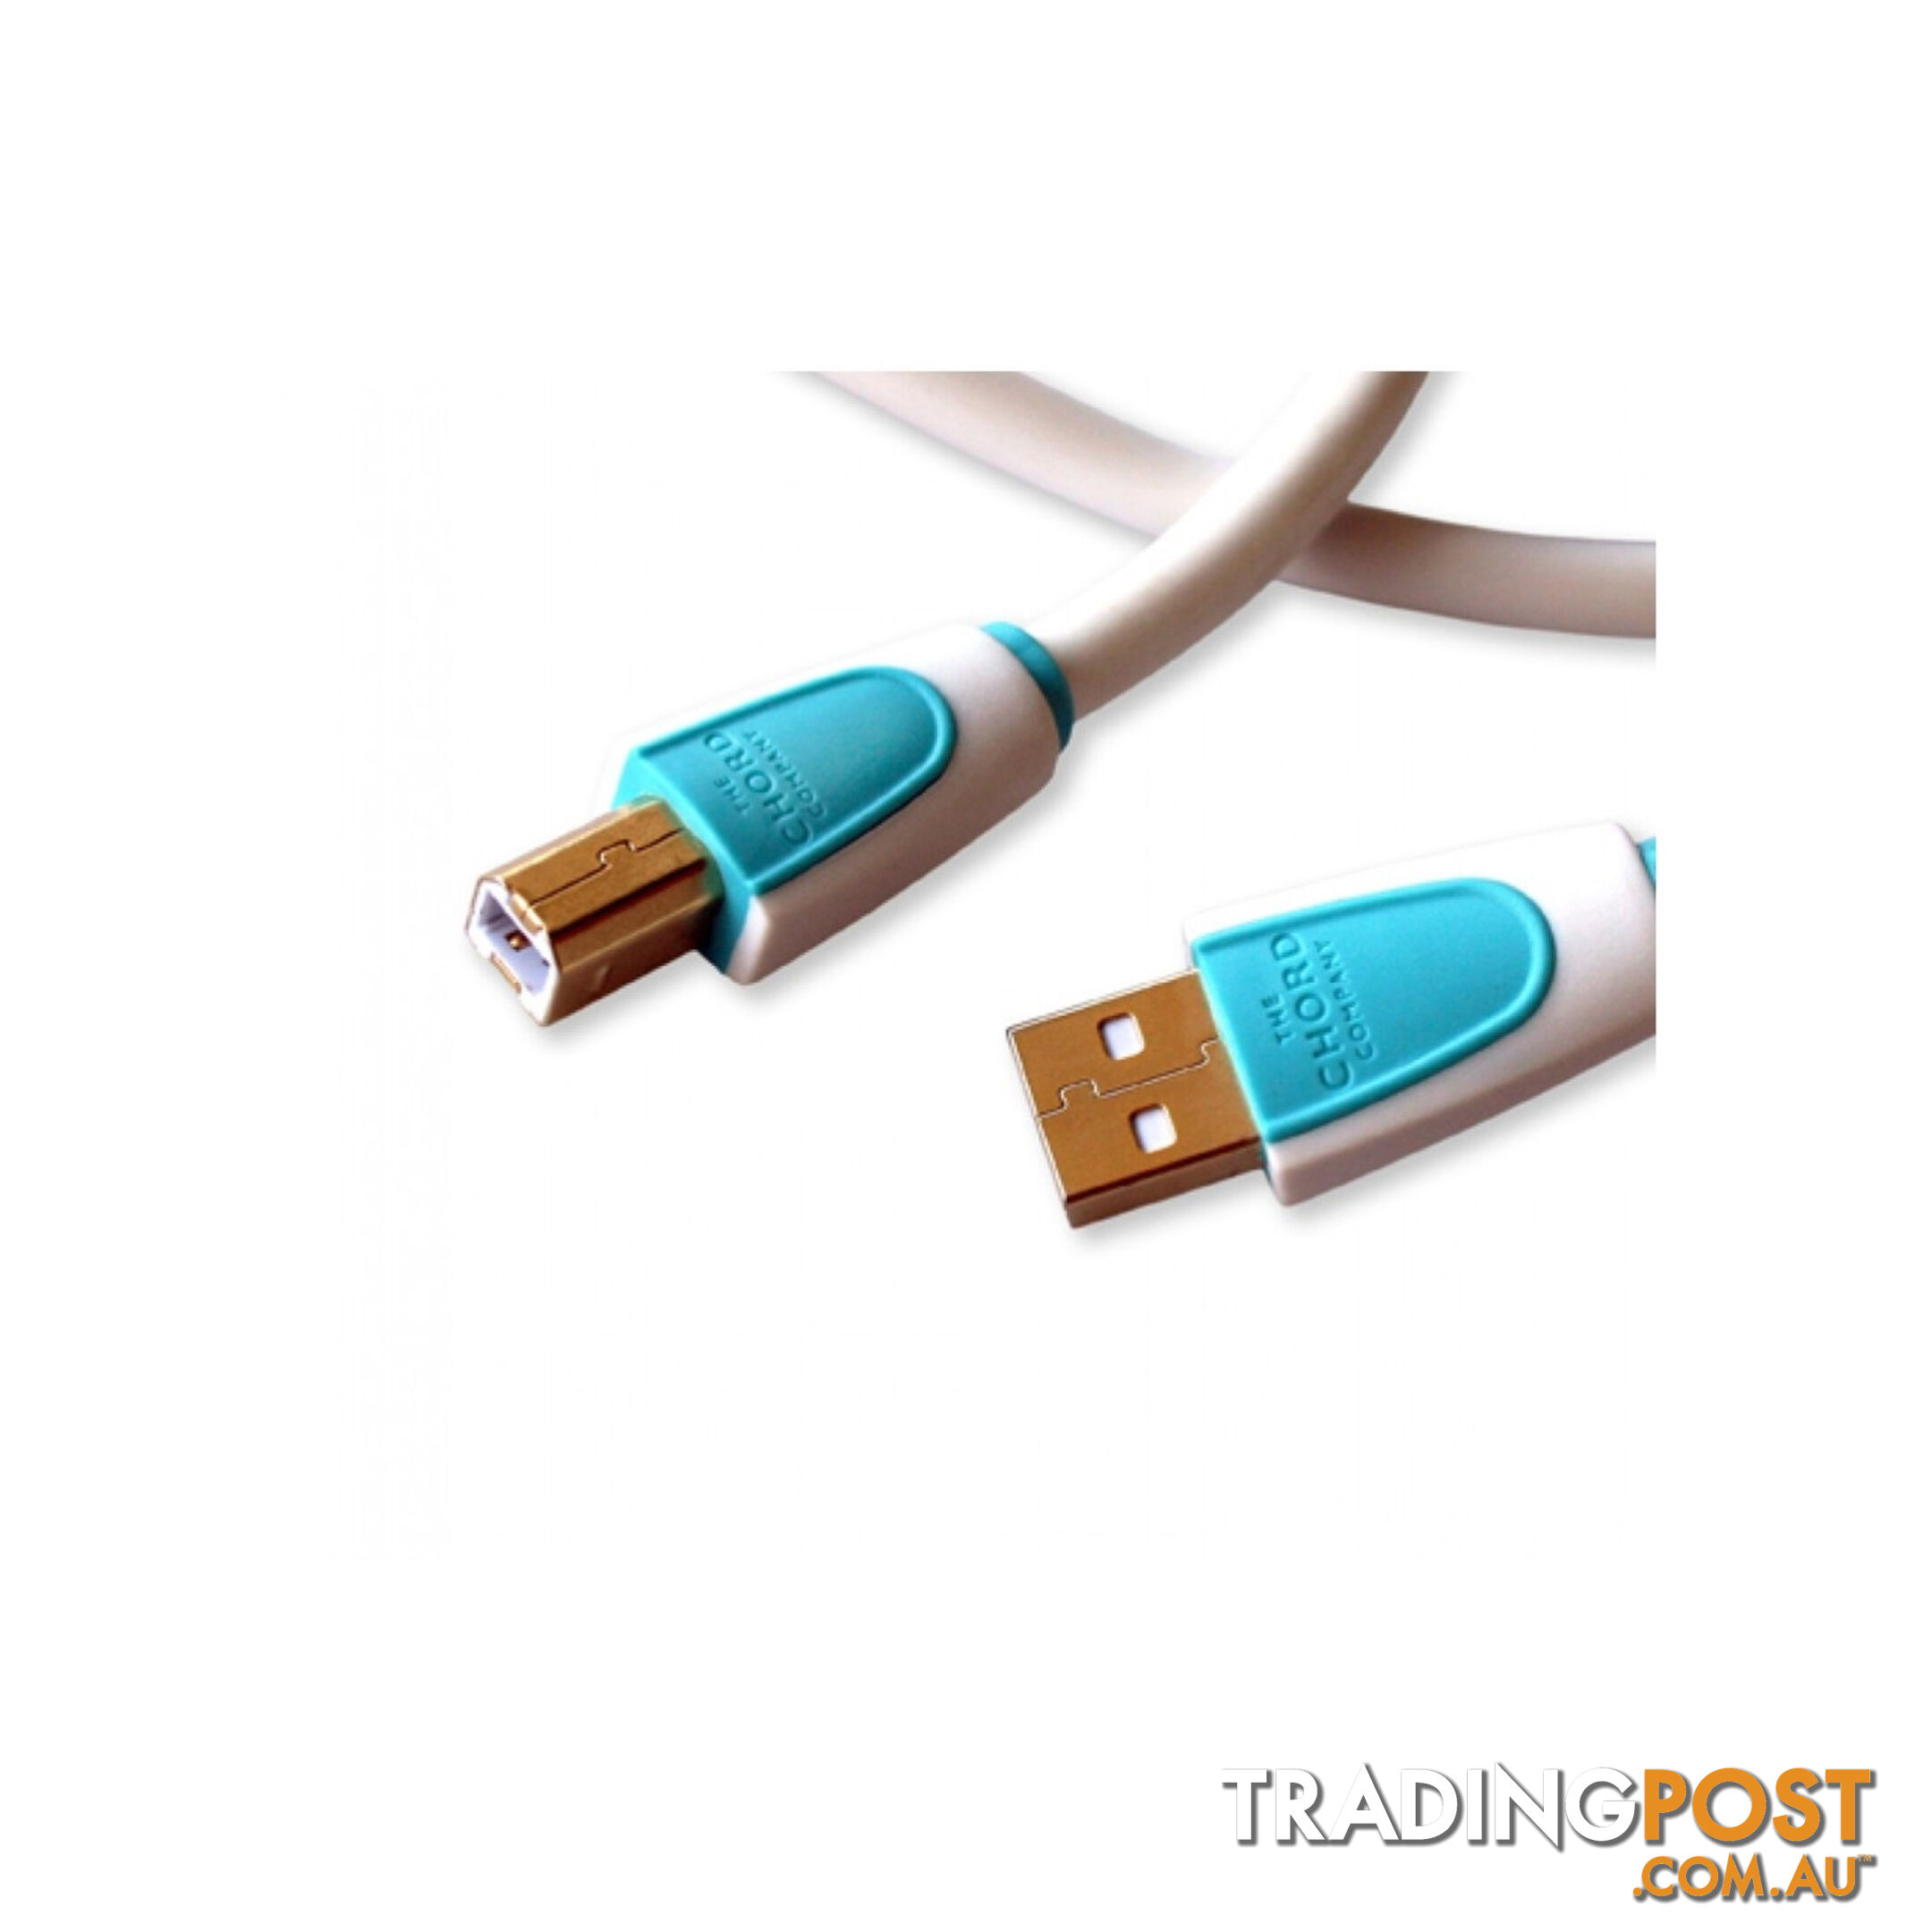 Chord C-USB Cable